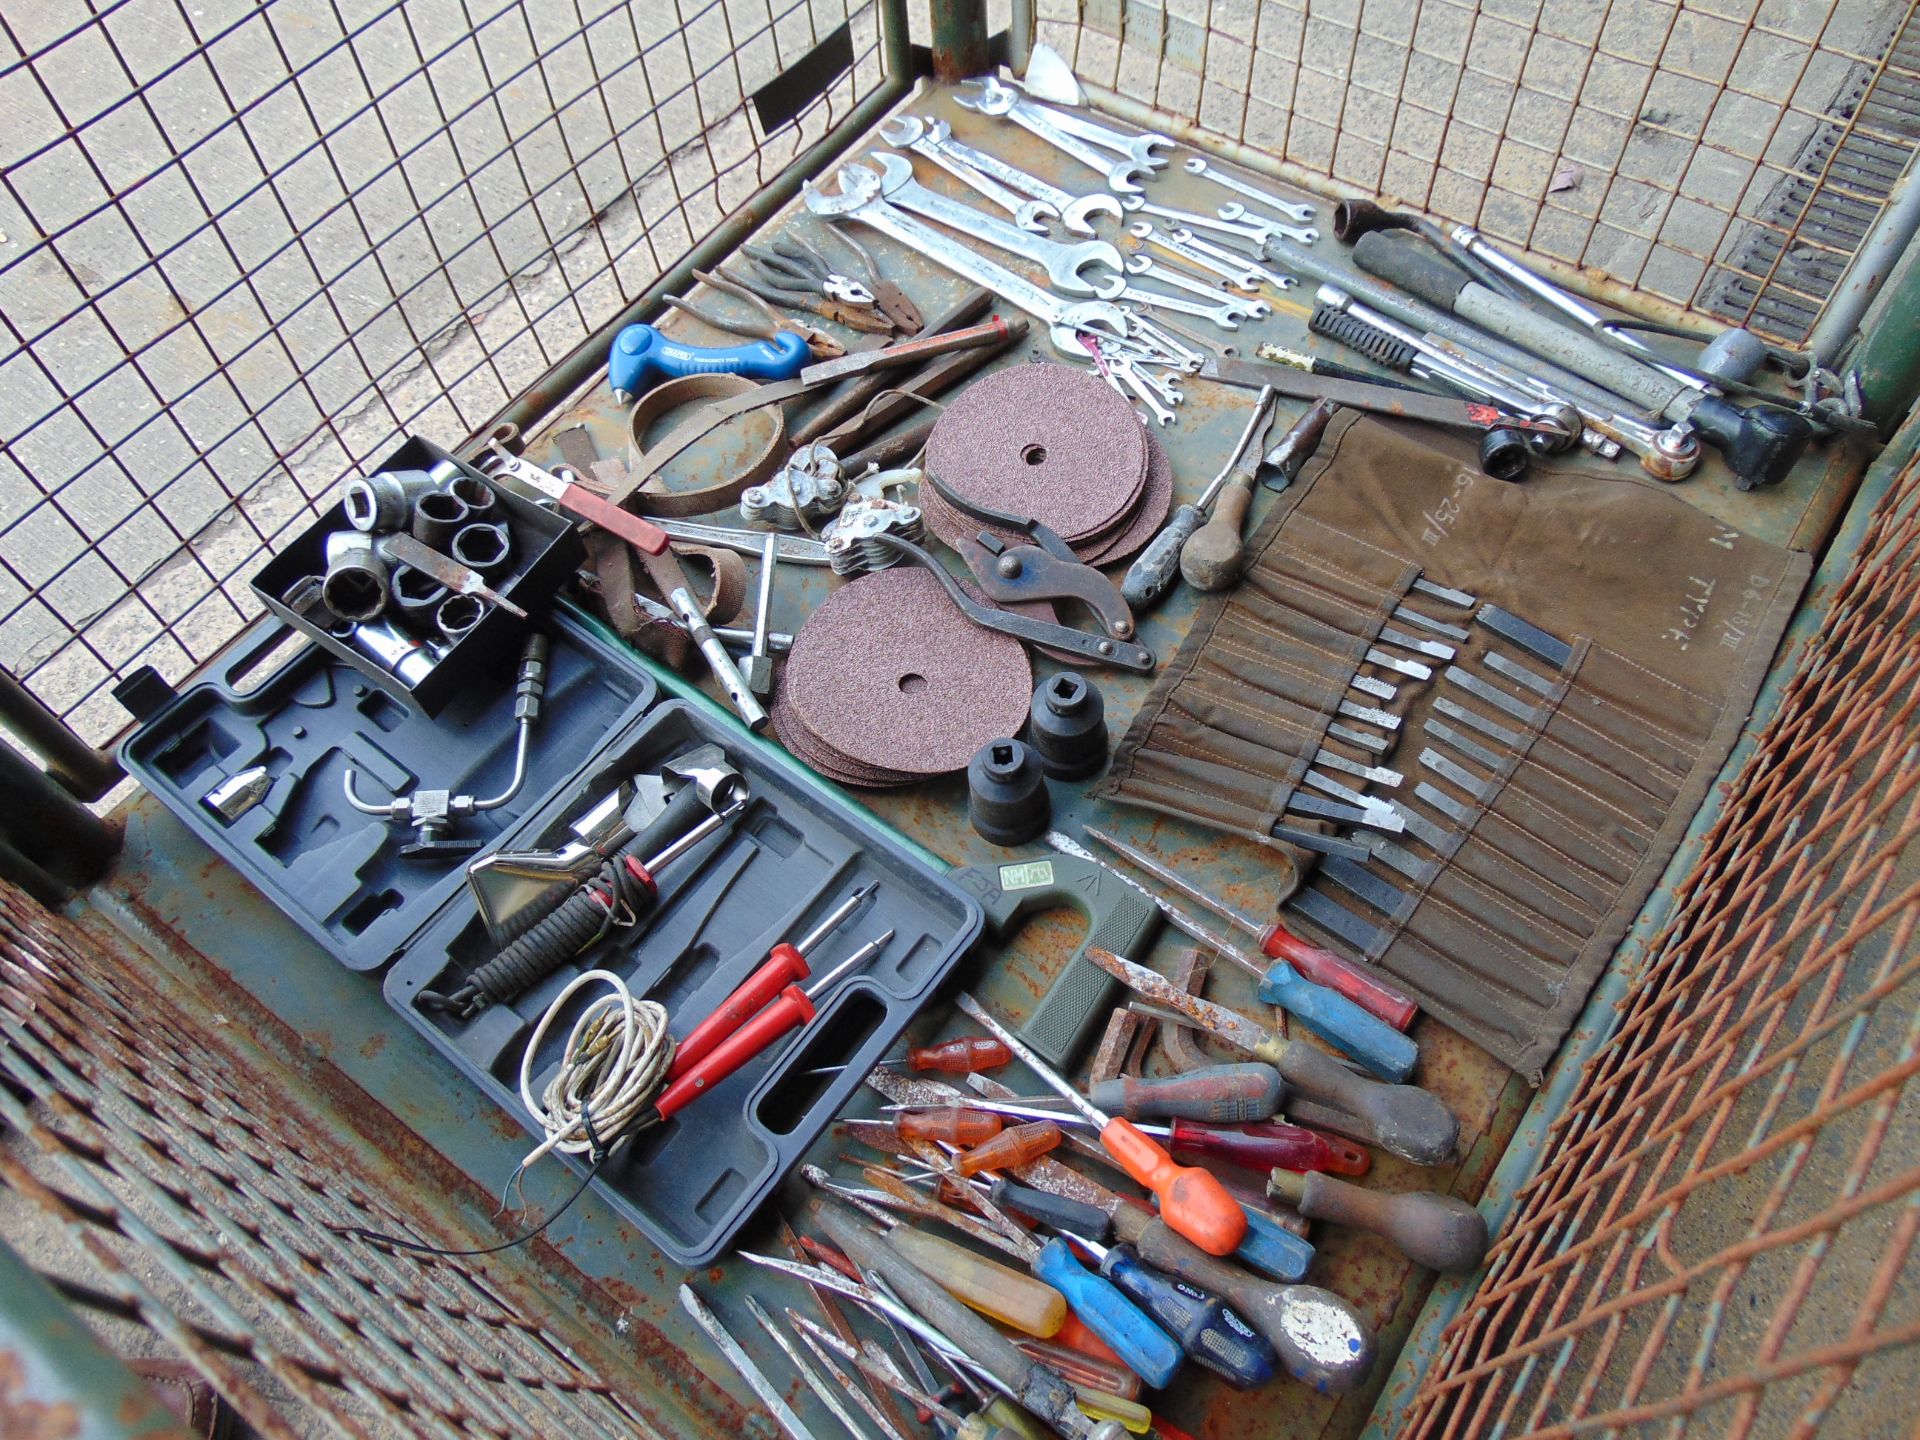 1 x Stillage of Workshop Tools, Spanners, Sockets, Lathe Tools, etc, Approx 120 Items - Image 7 of 9